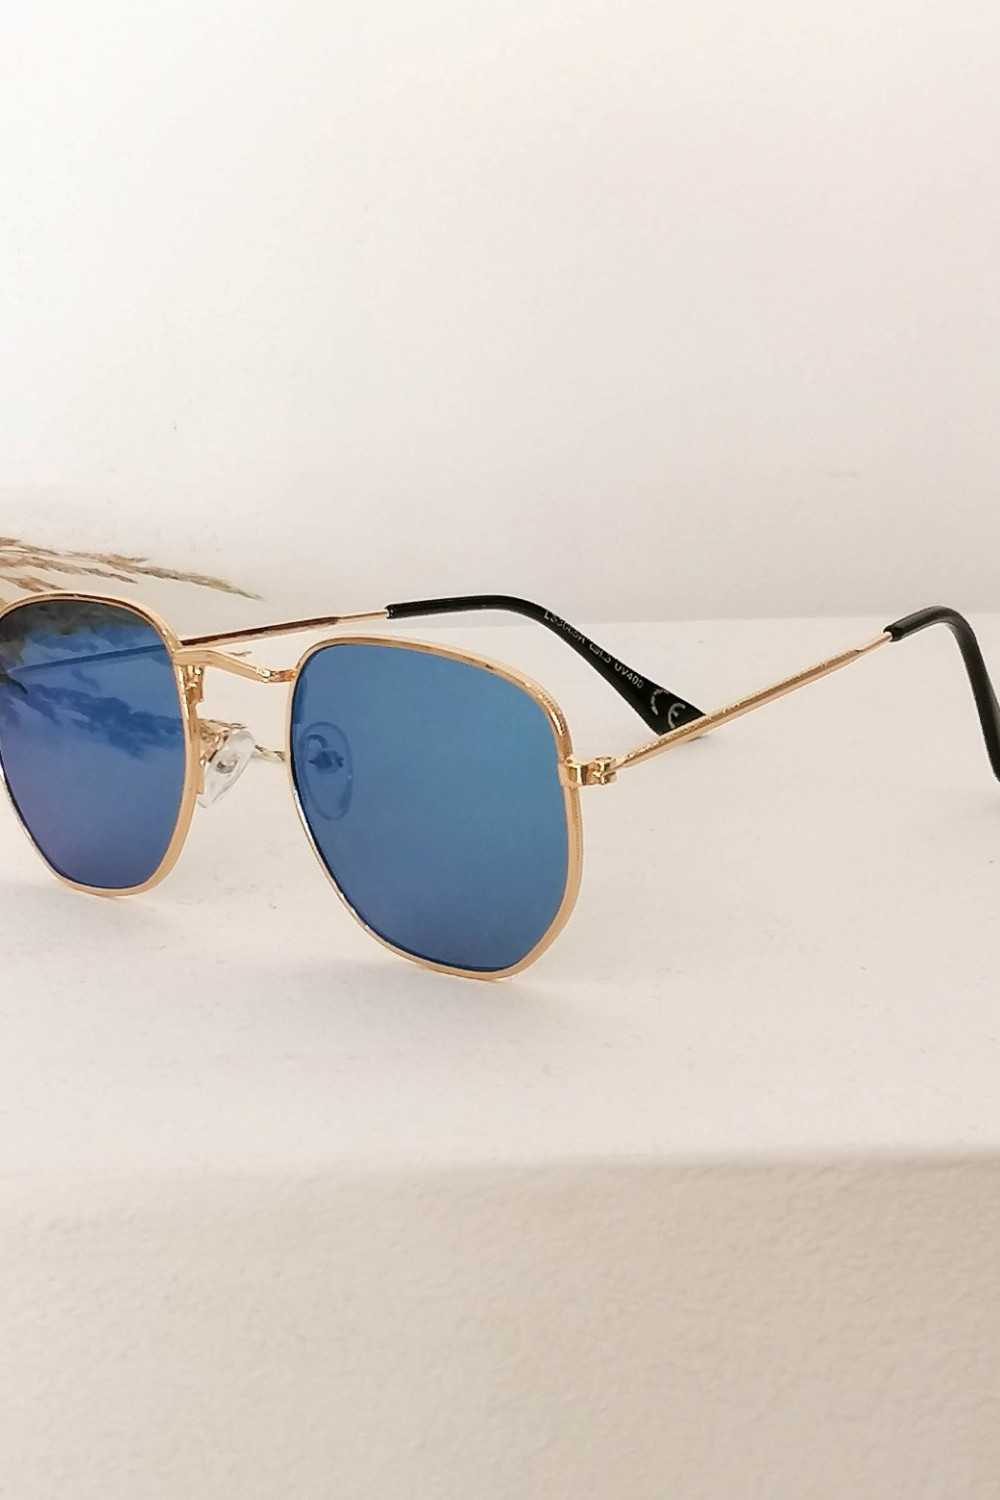 Women's blue polygon mirror sunglasses with gold frame Luxury LS3065